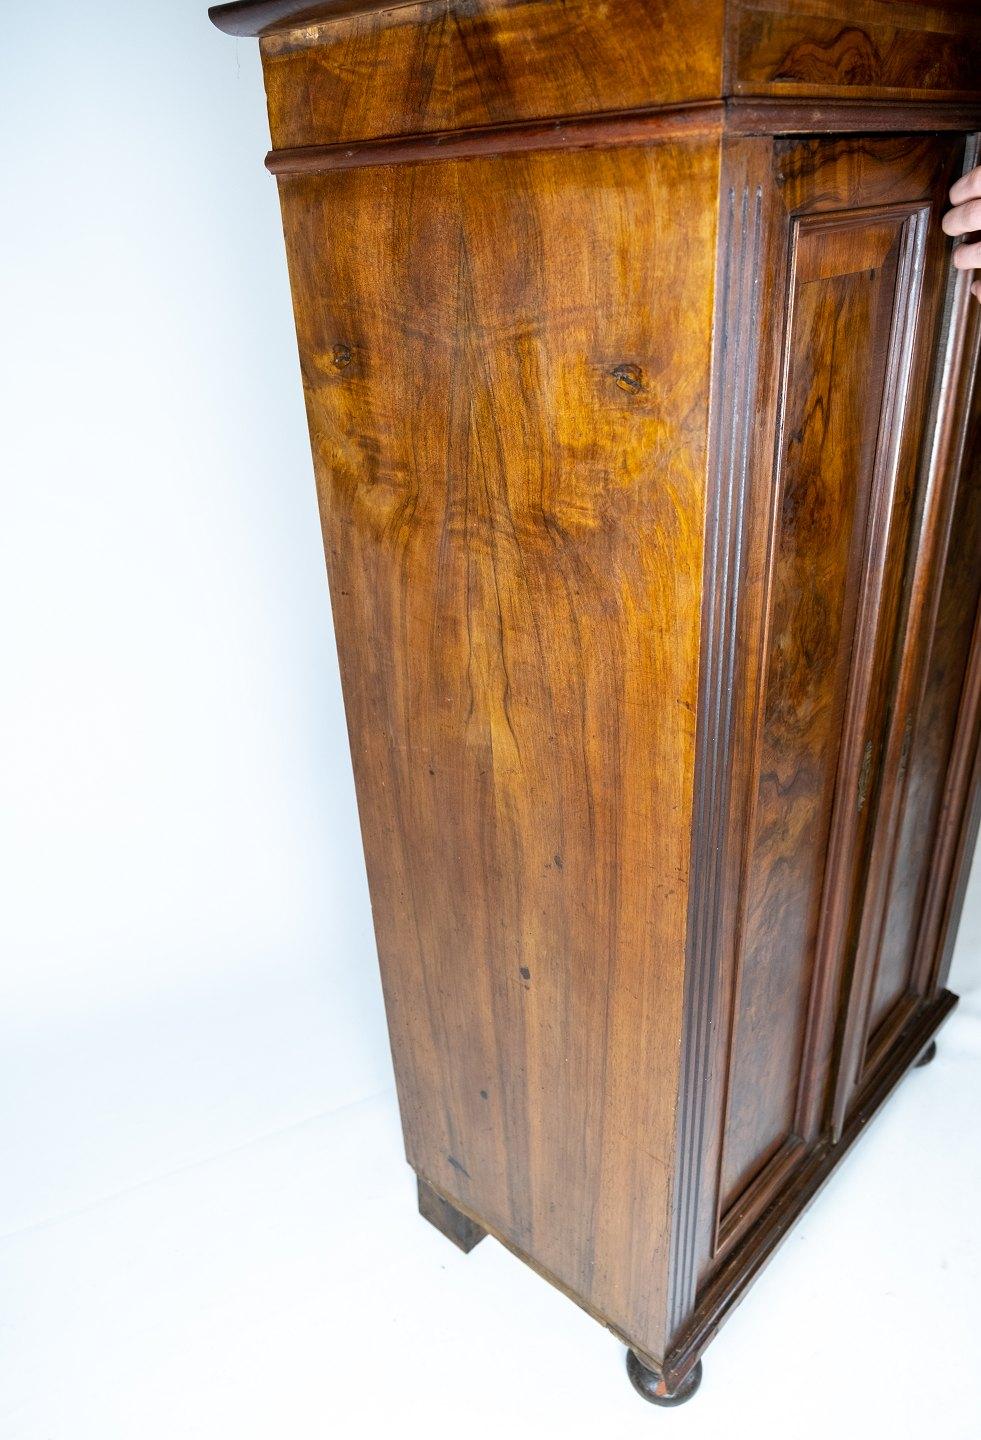 Late 19th Century Cabinet of Walnut, in Great Antique Condition from the 1880s